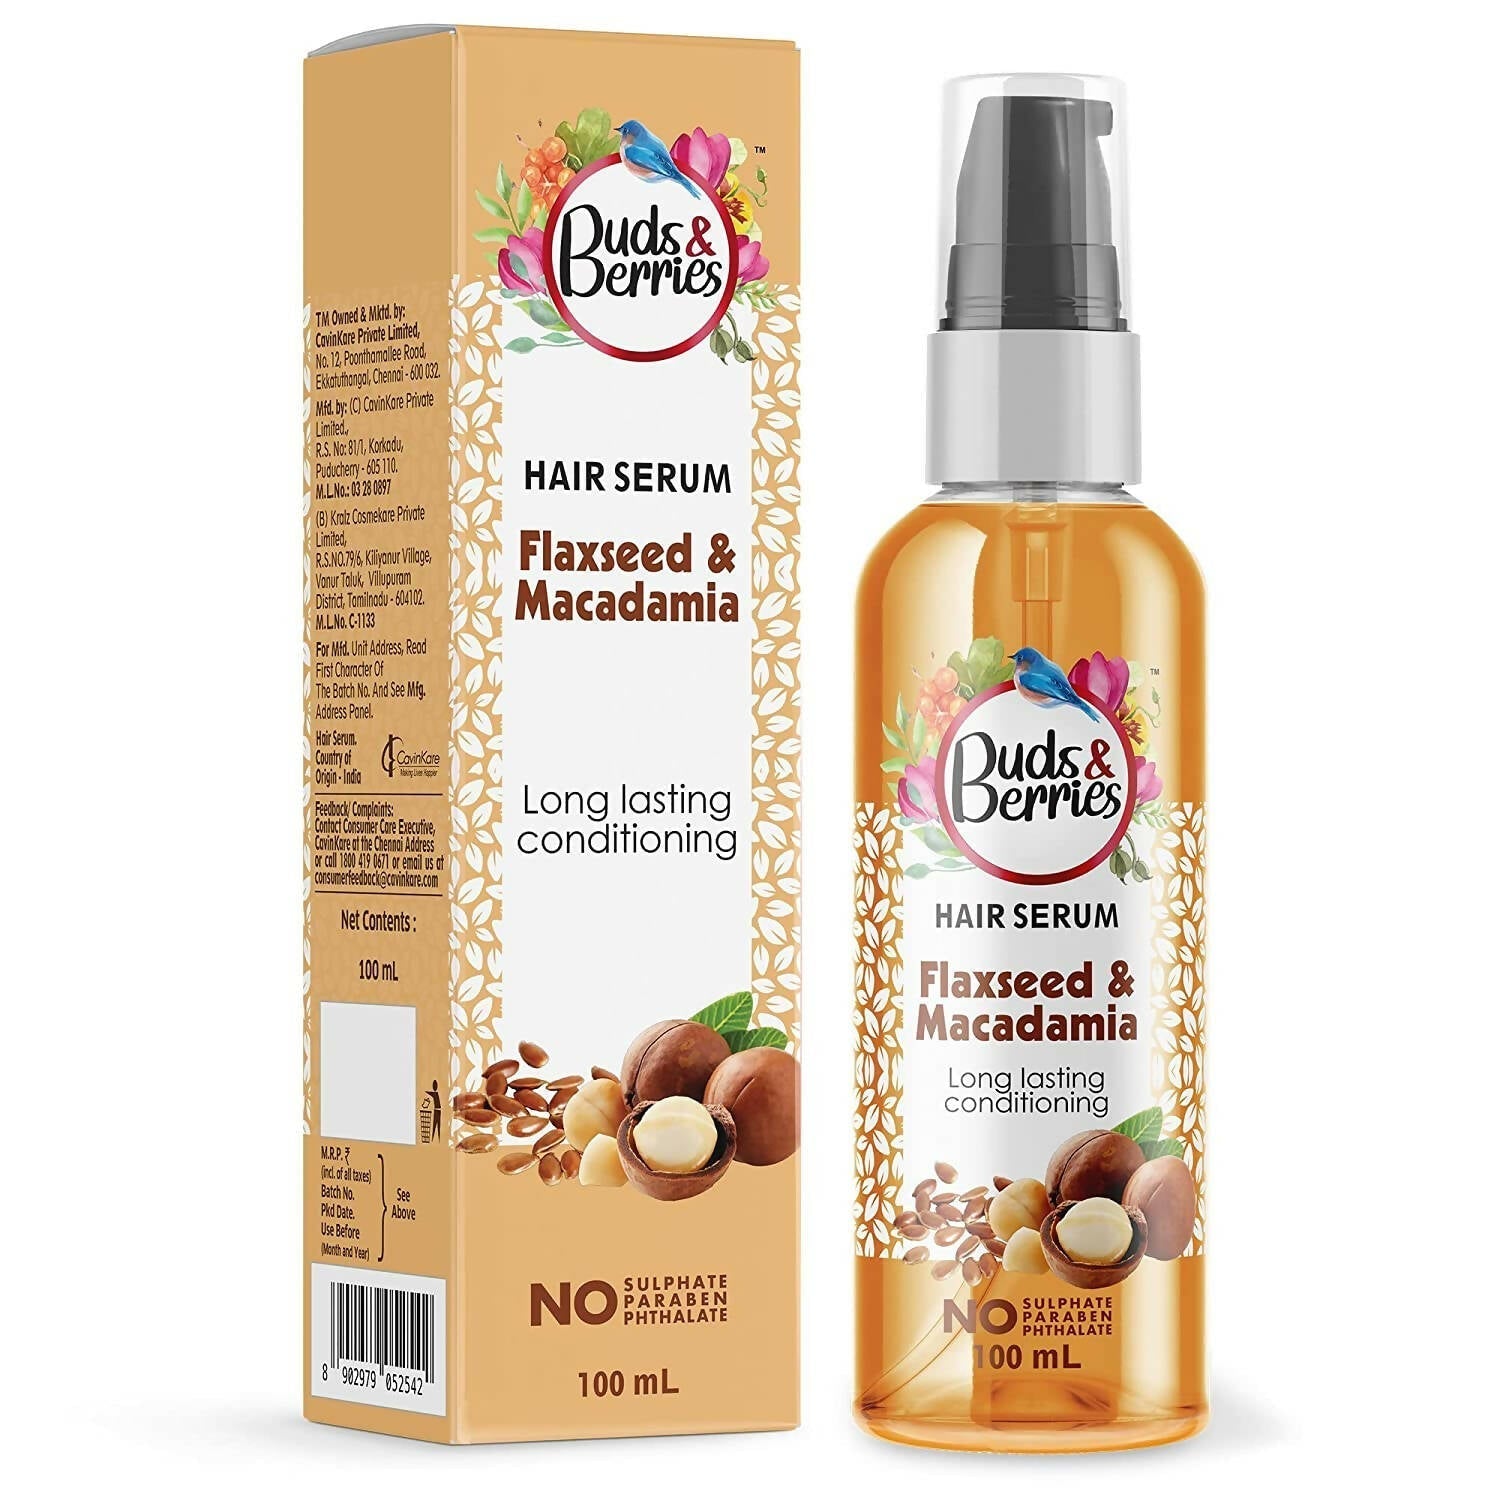 Buds & Berries Hair Serum with Flaxseed and Macadamia - Buy in USA AUSTRALIA CANADA